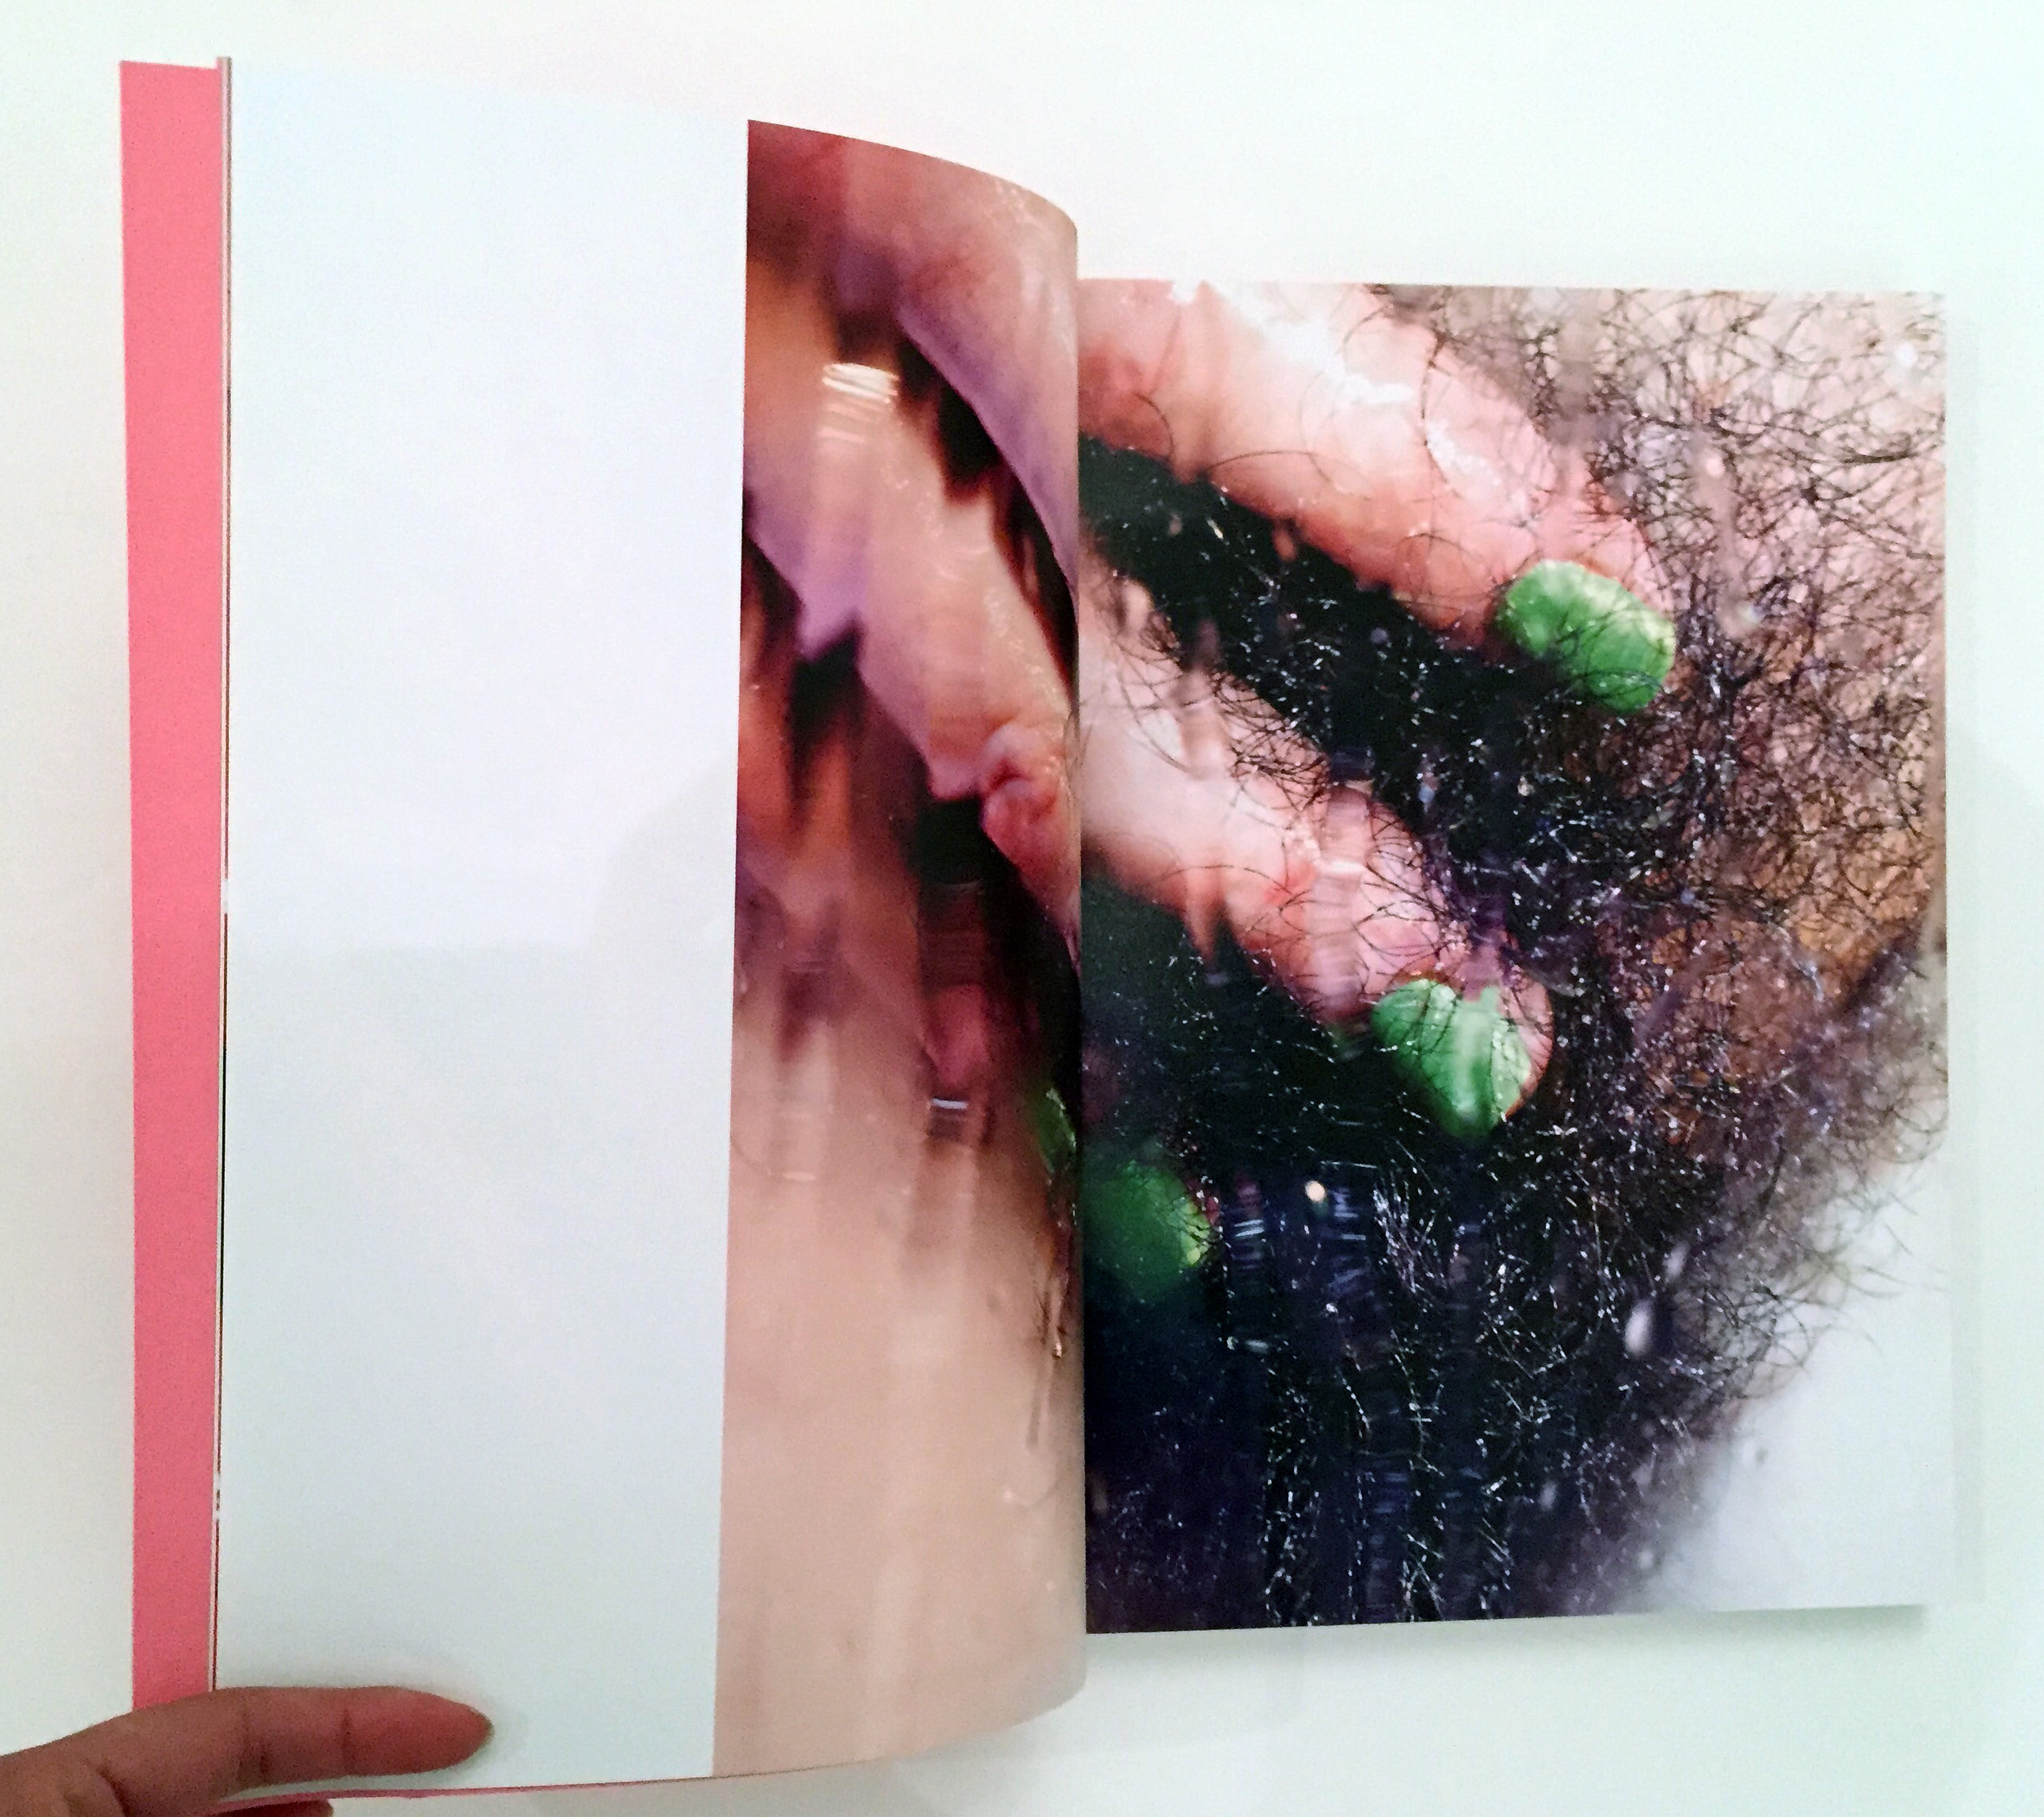 A page from Marilyn Minter's Plush. (Courtesy the artist and Fulton Ryder)